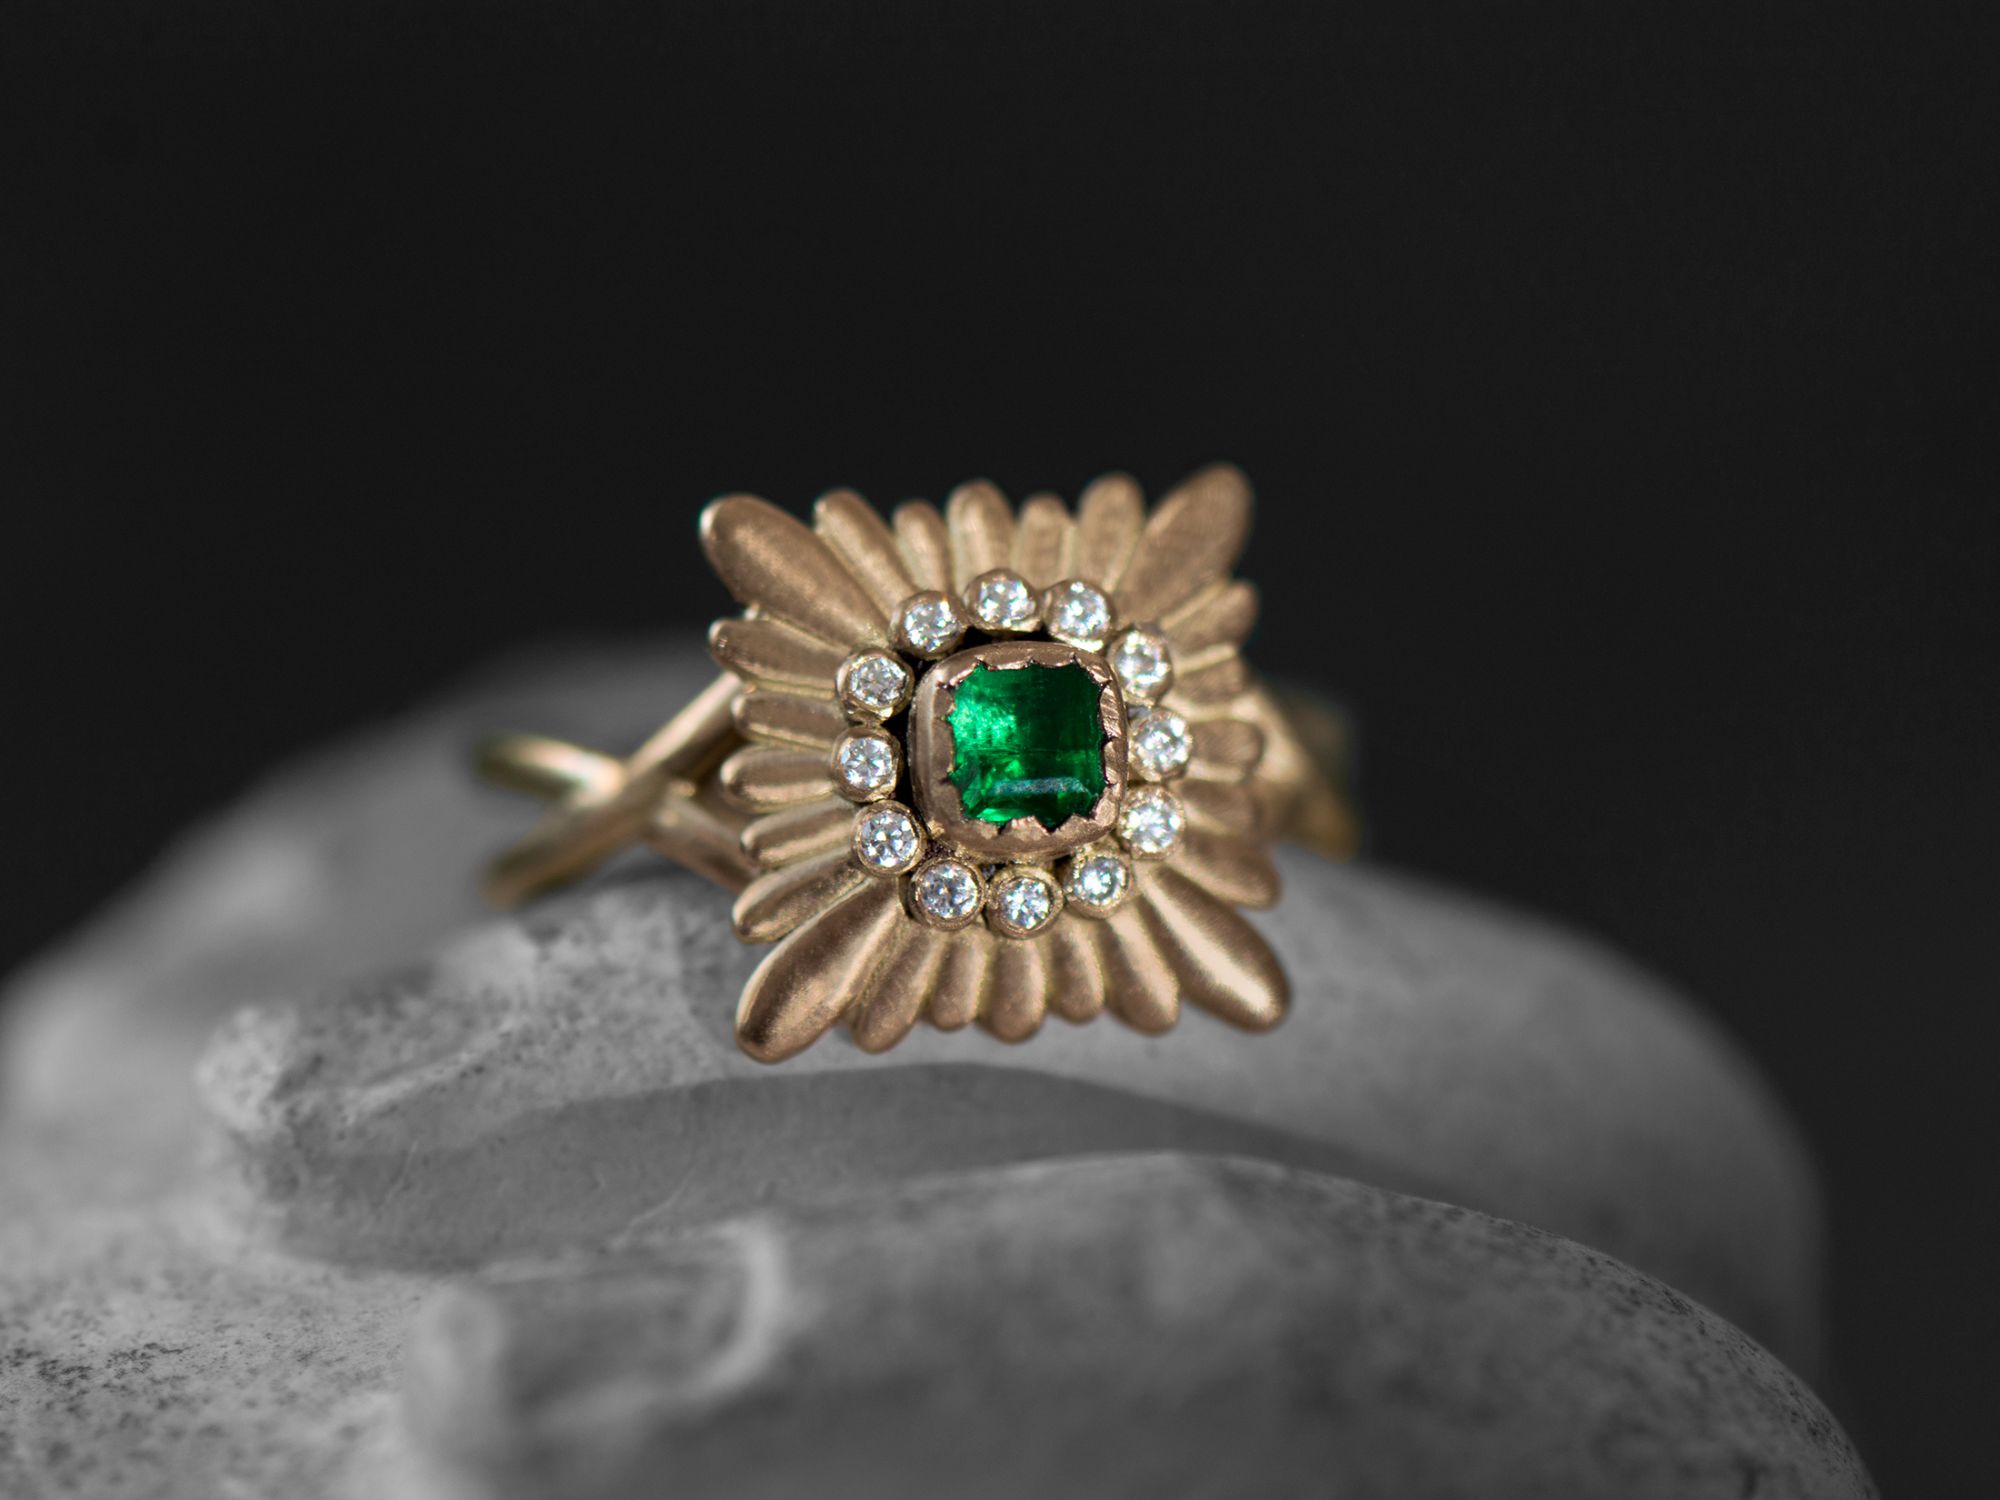 Mila Emerald and diamonds ring by Emmanuelle Zysman